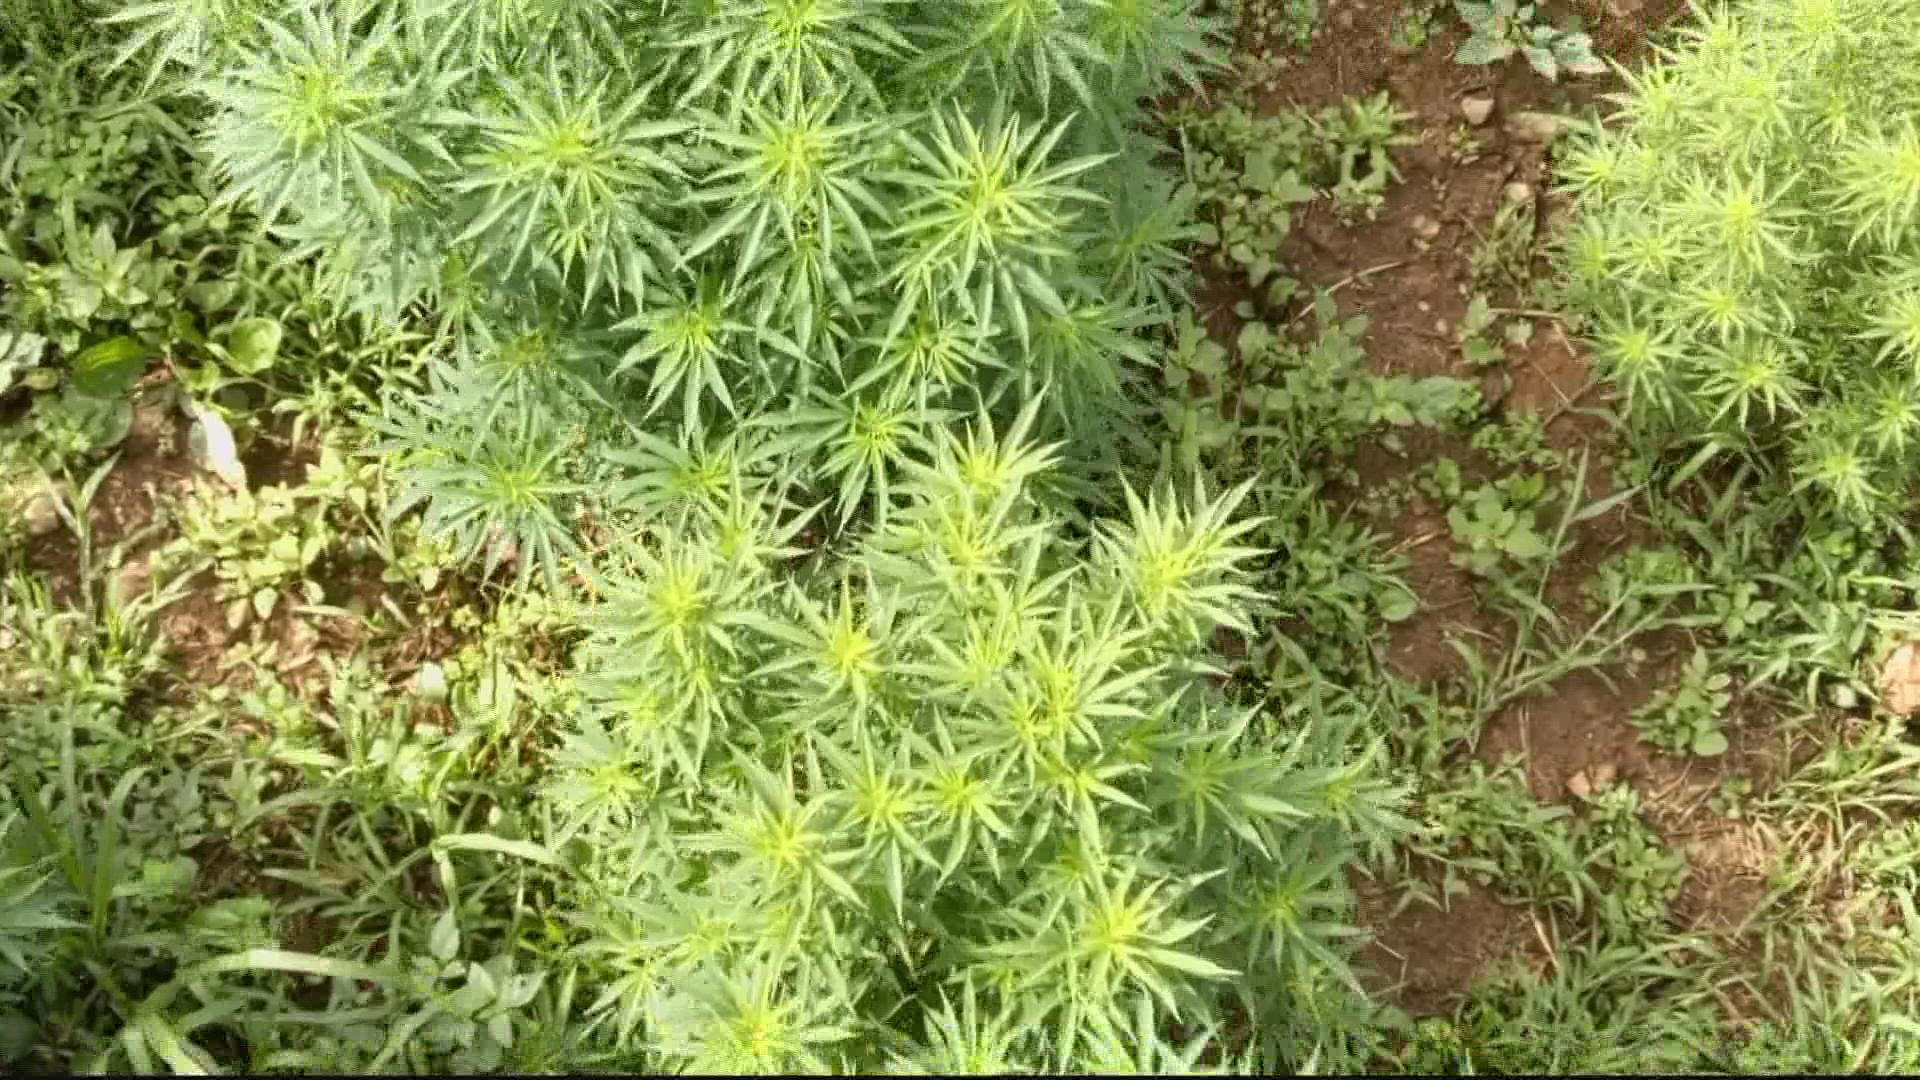 Hemp producers are starting to move to North Carolina and Tennessee after the crackdown by Virginia's Attorney General.